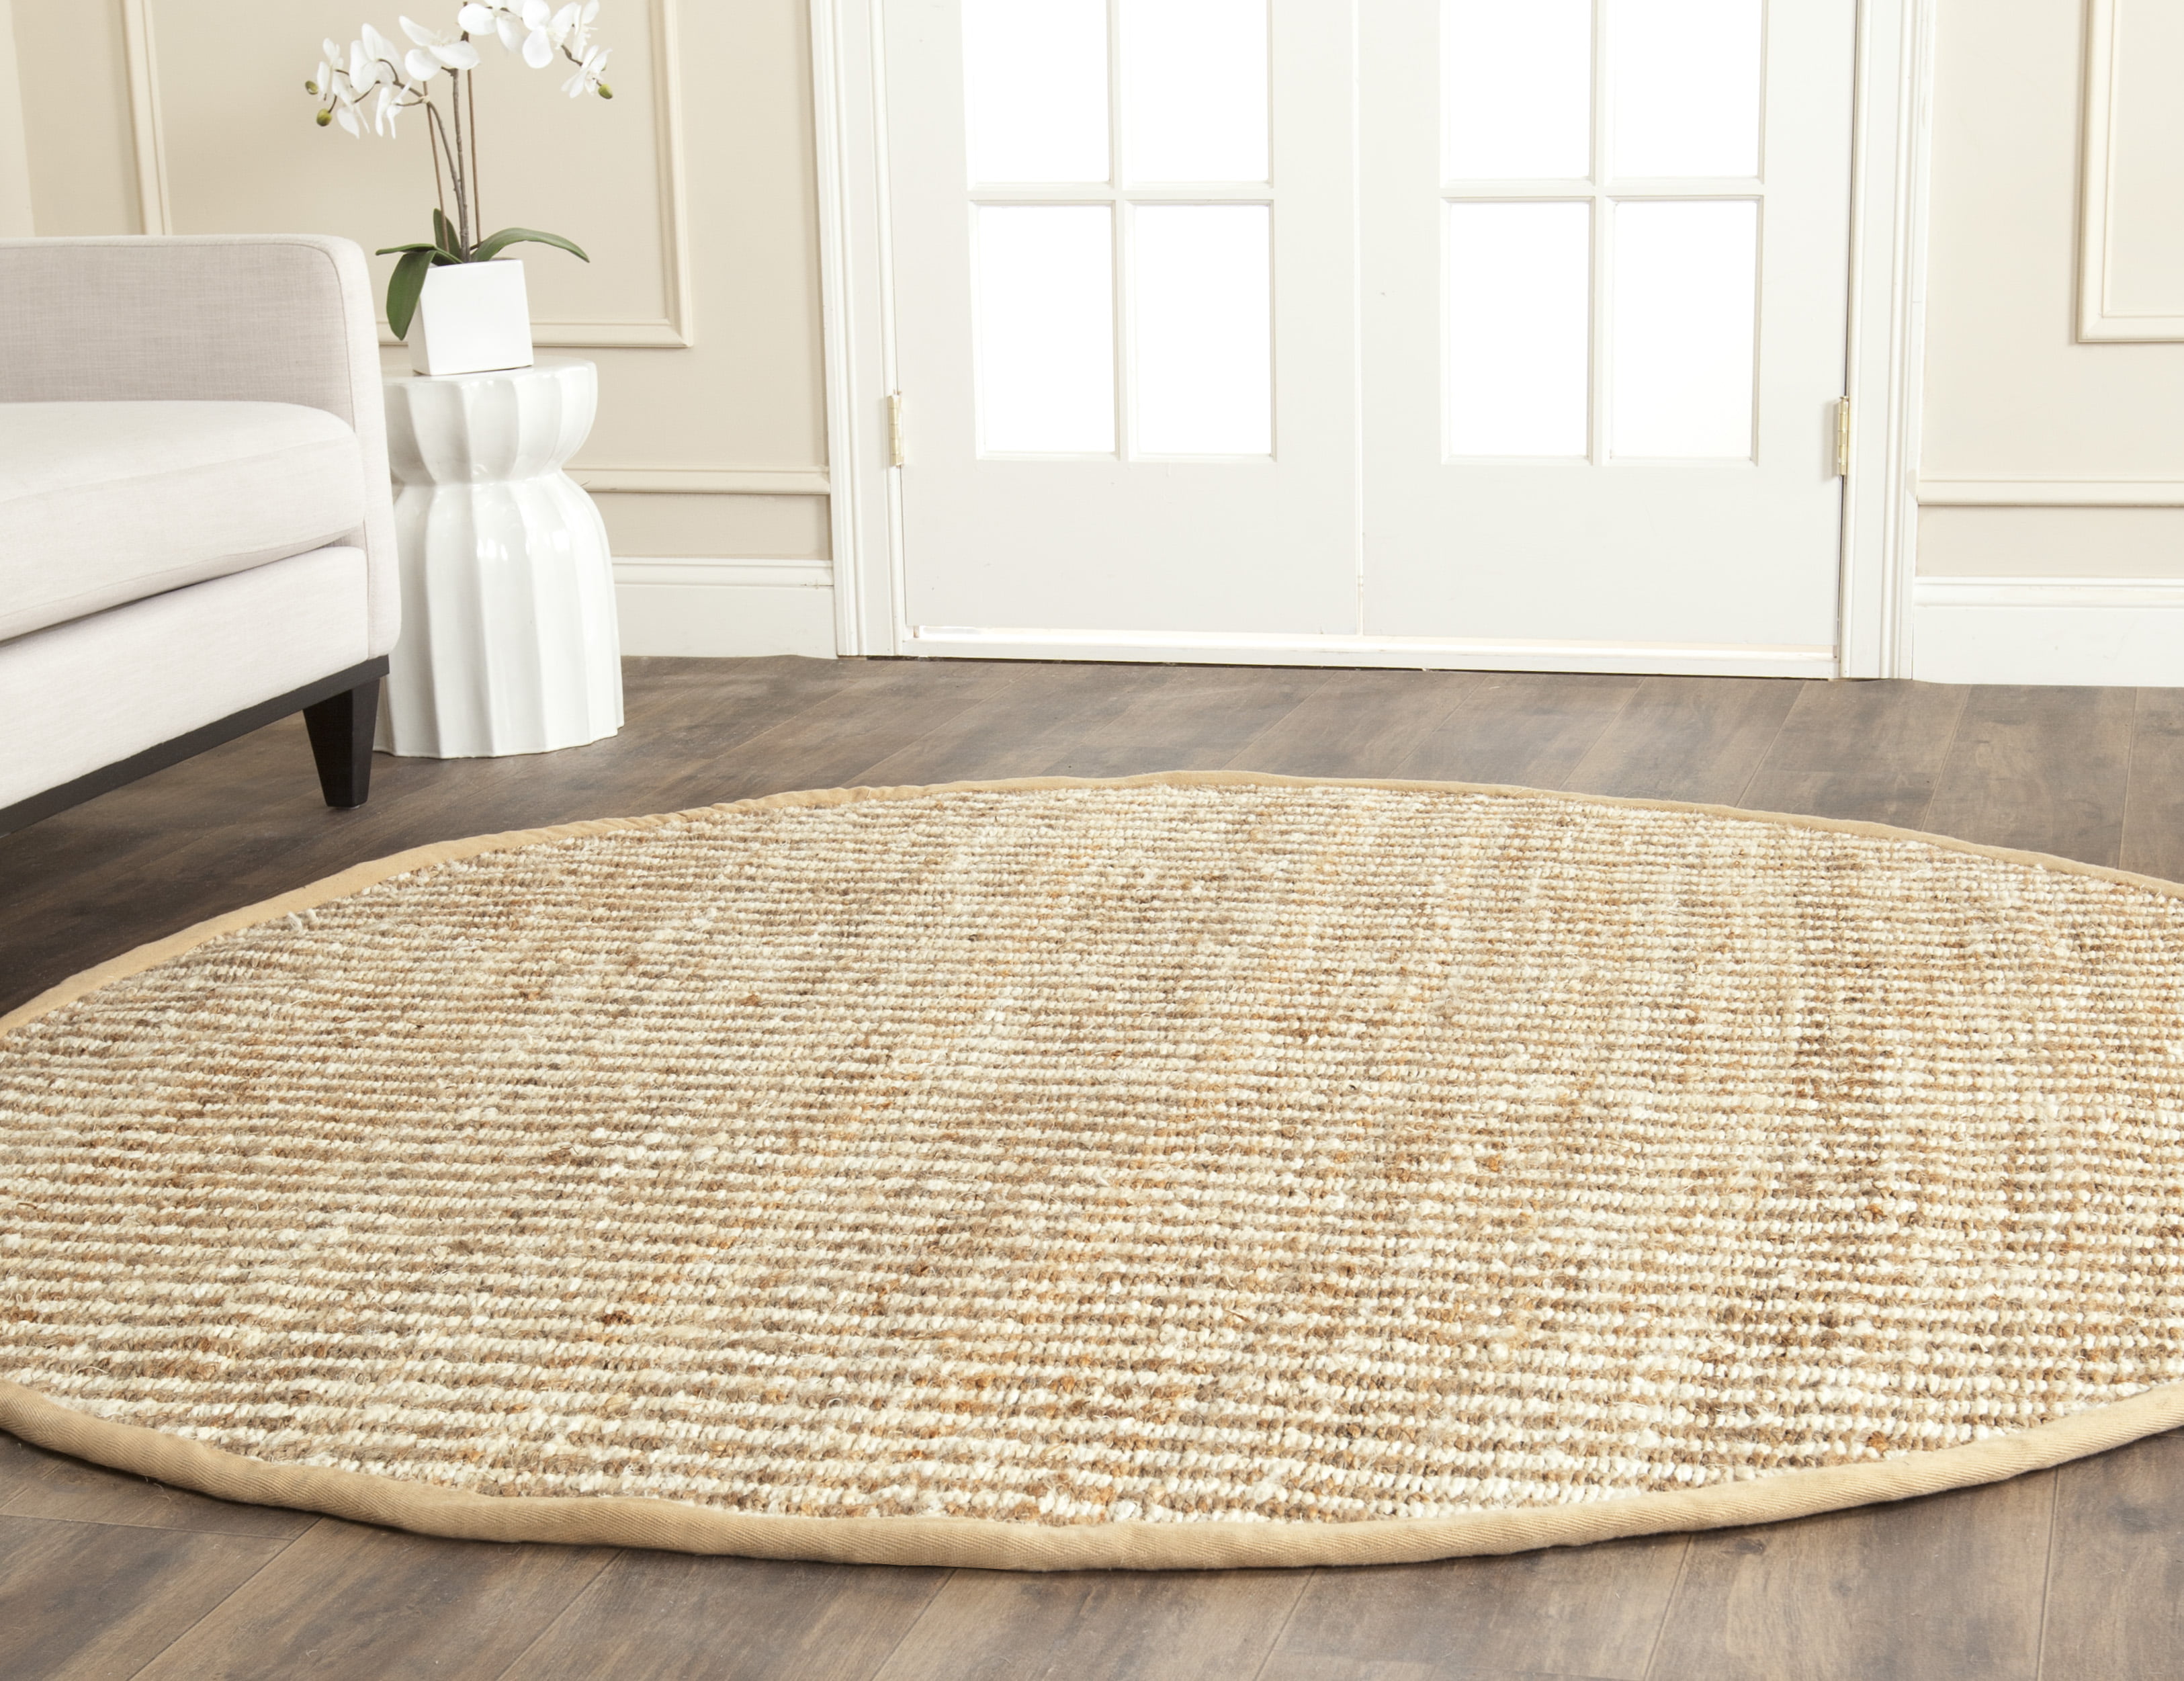 SMALL X LARGE JUTE SUMMER LIVING CONSERVATORY PATIO KITCHEN NATURAL FIBRE RUG 